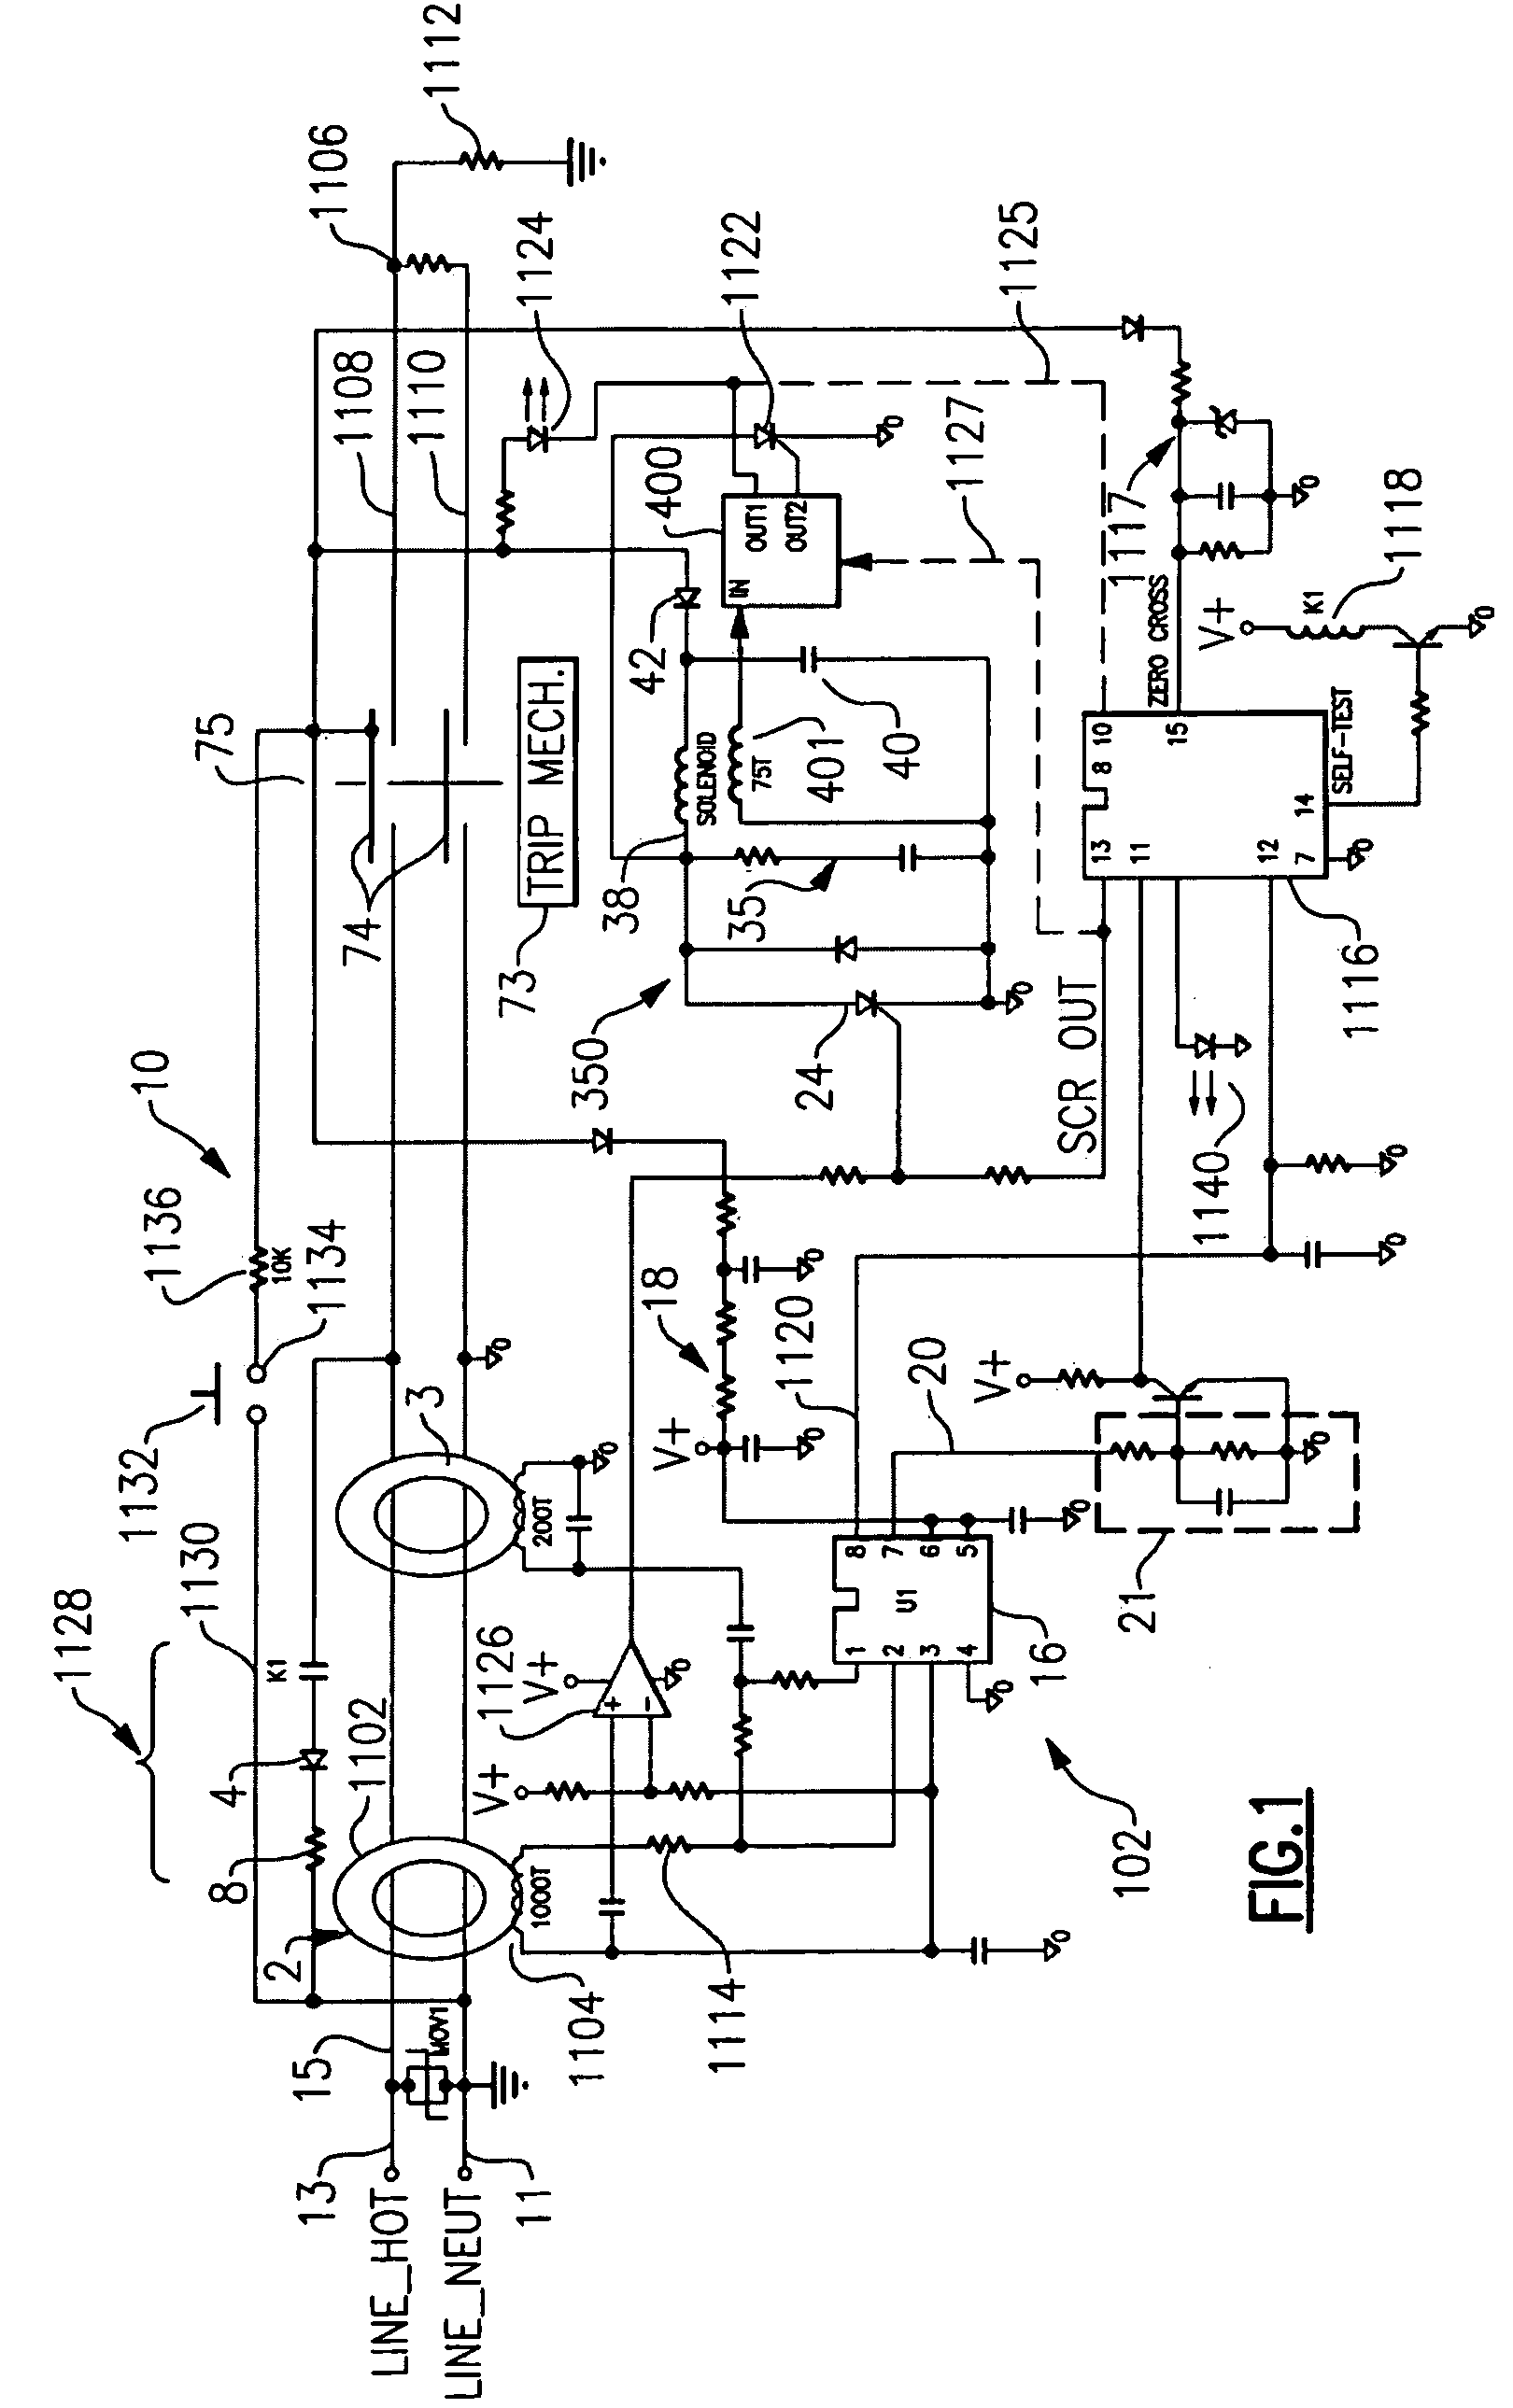 Protective device with end-of-life indication before power denial